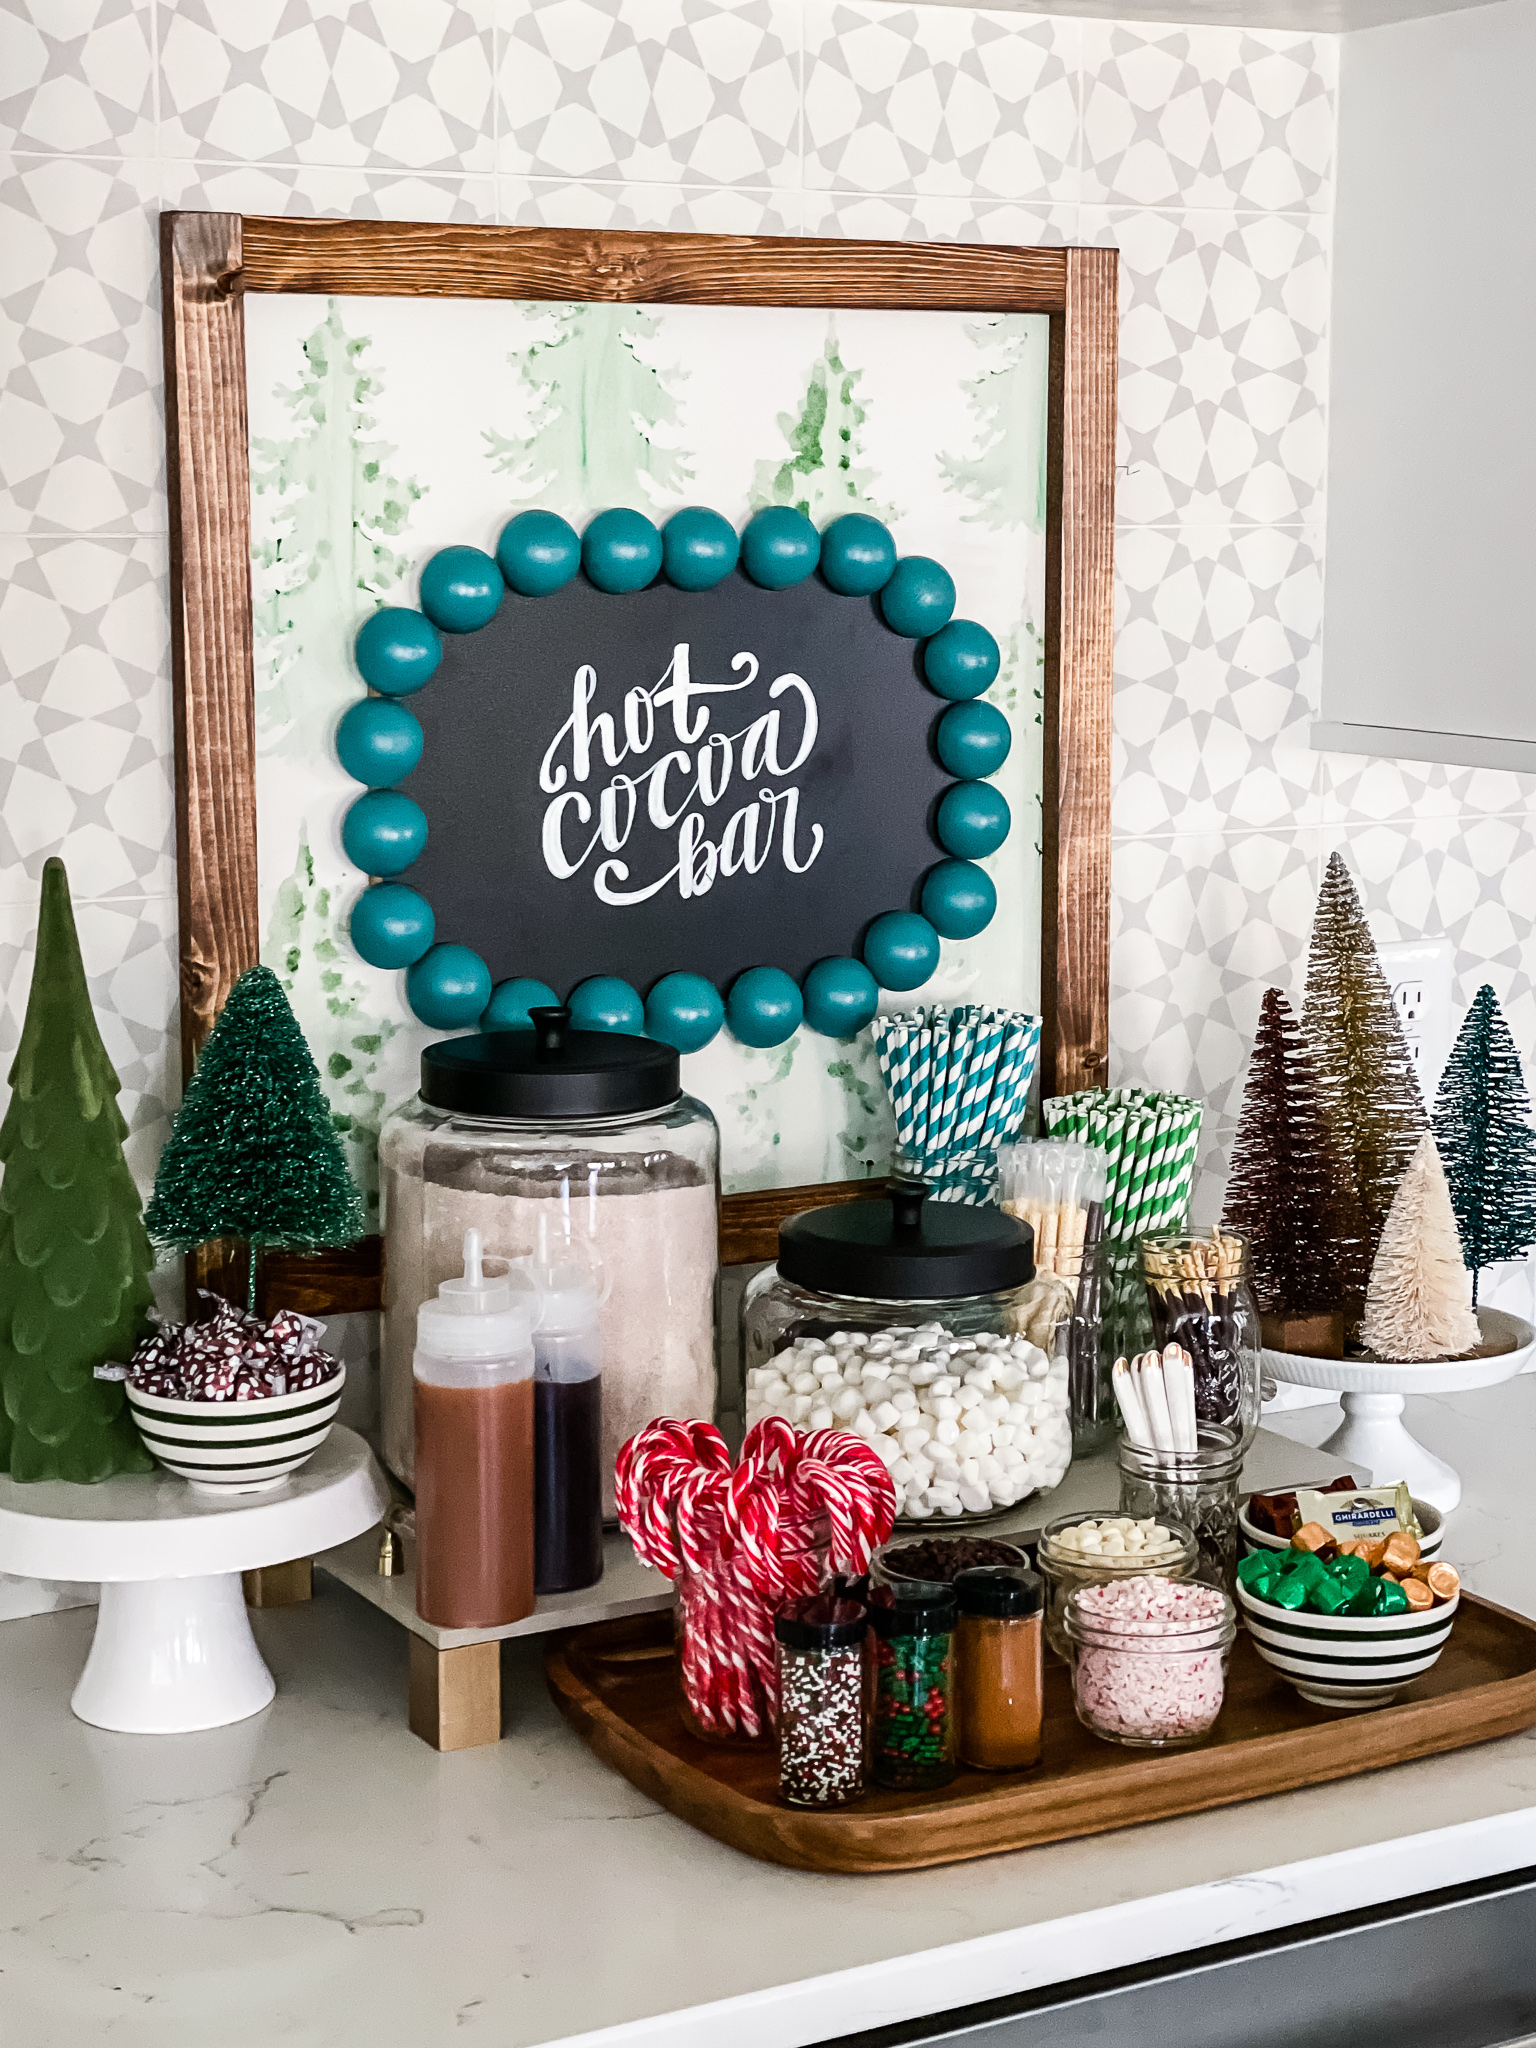 Try This Simple Hot Cocoa Bar Idea! - Design Improvised